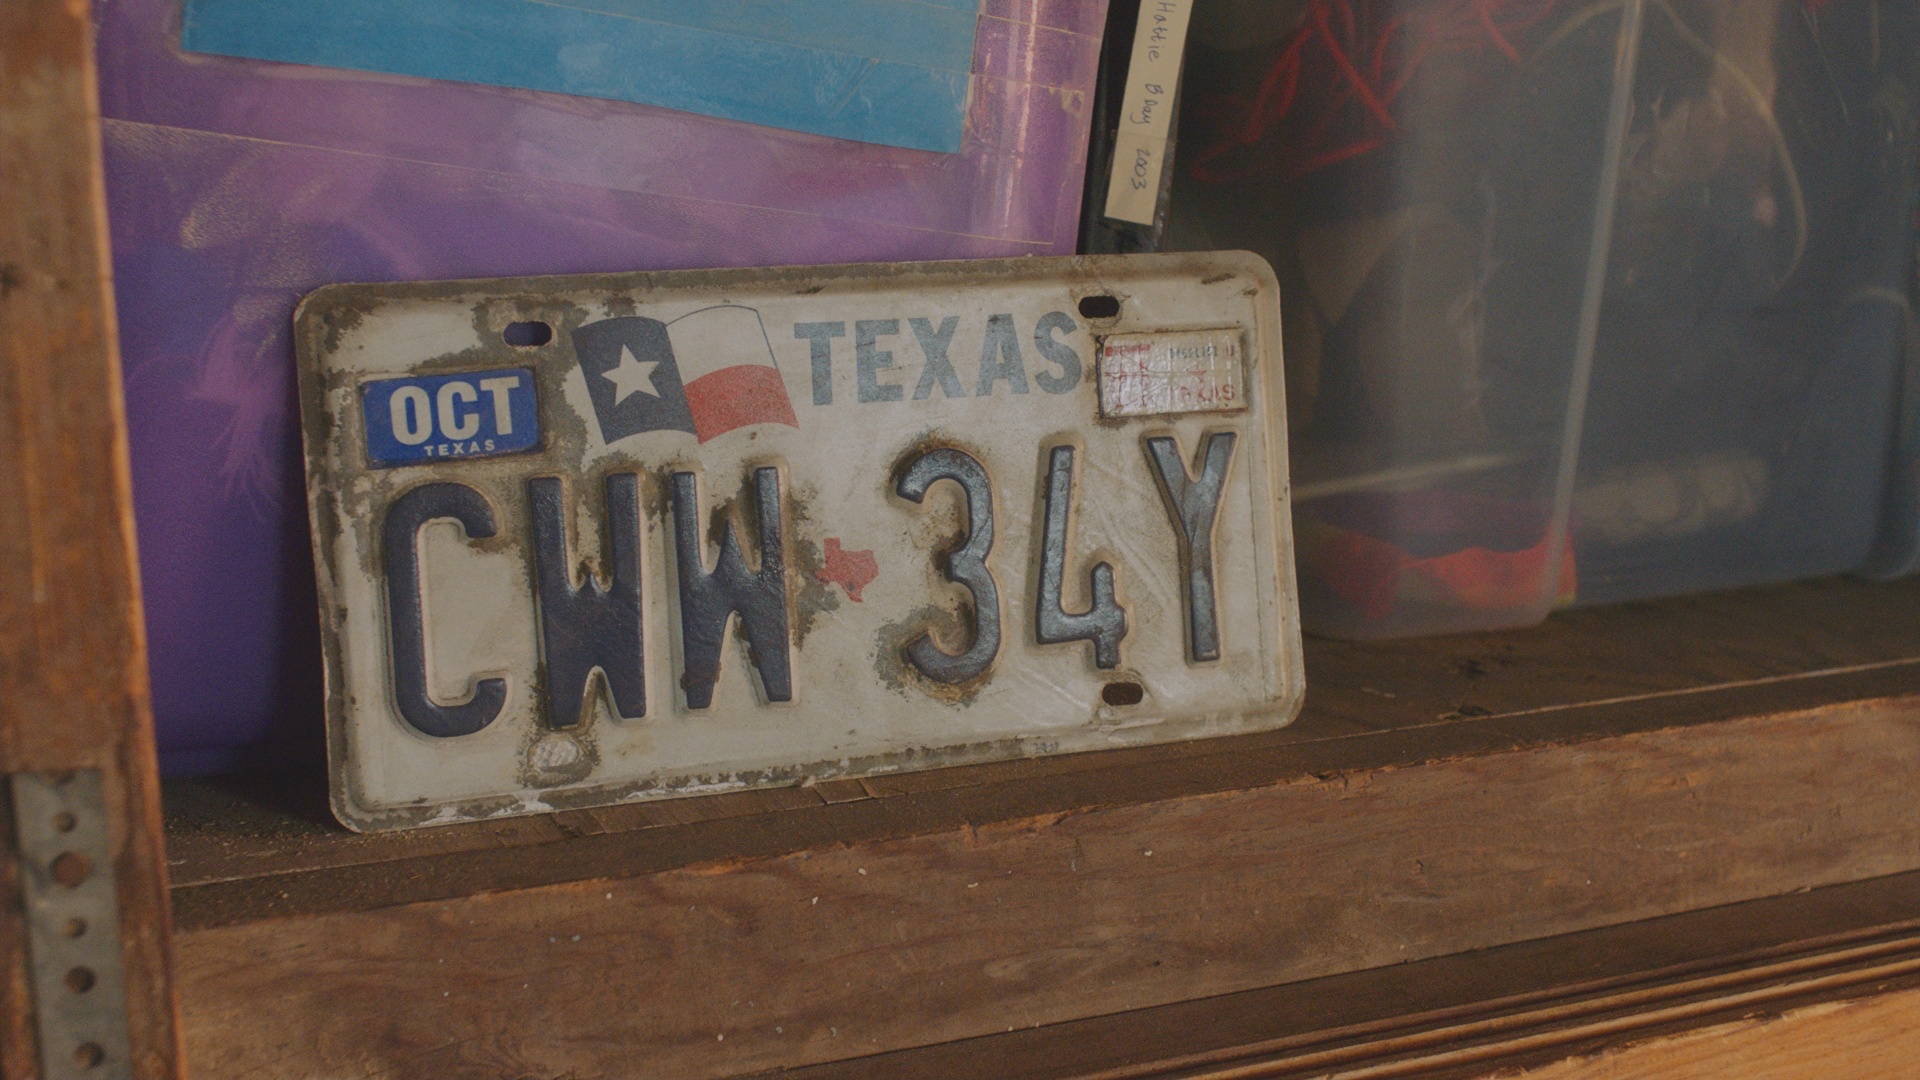 Closeup of Texas license plate on display